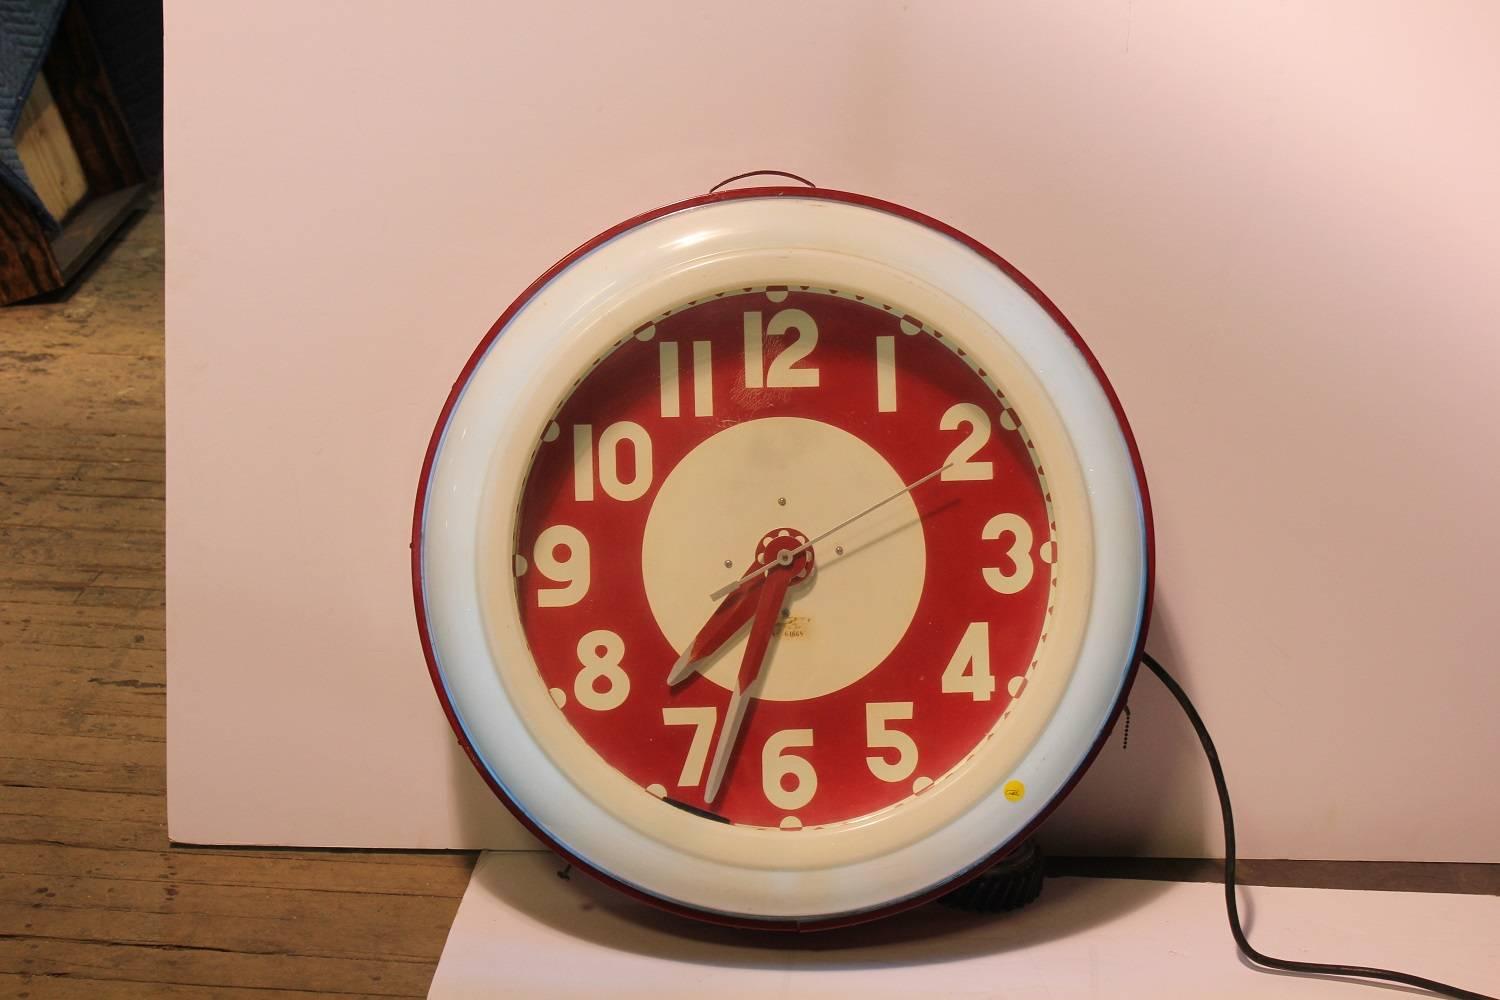 1930s neon clock by Cleveland Clock Company.